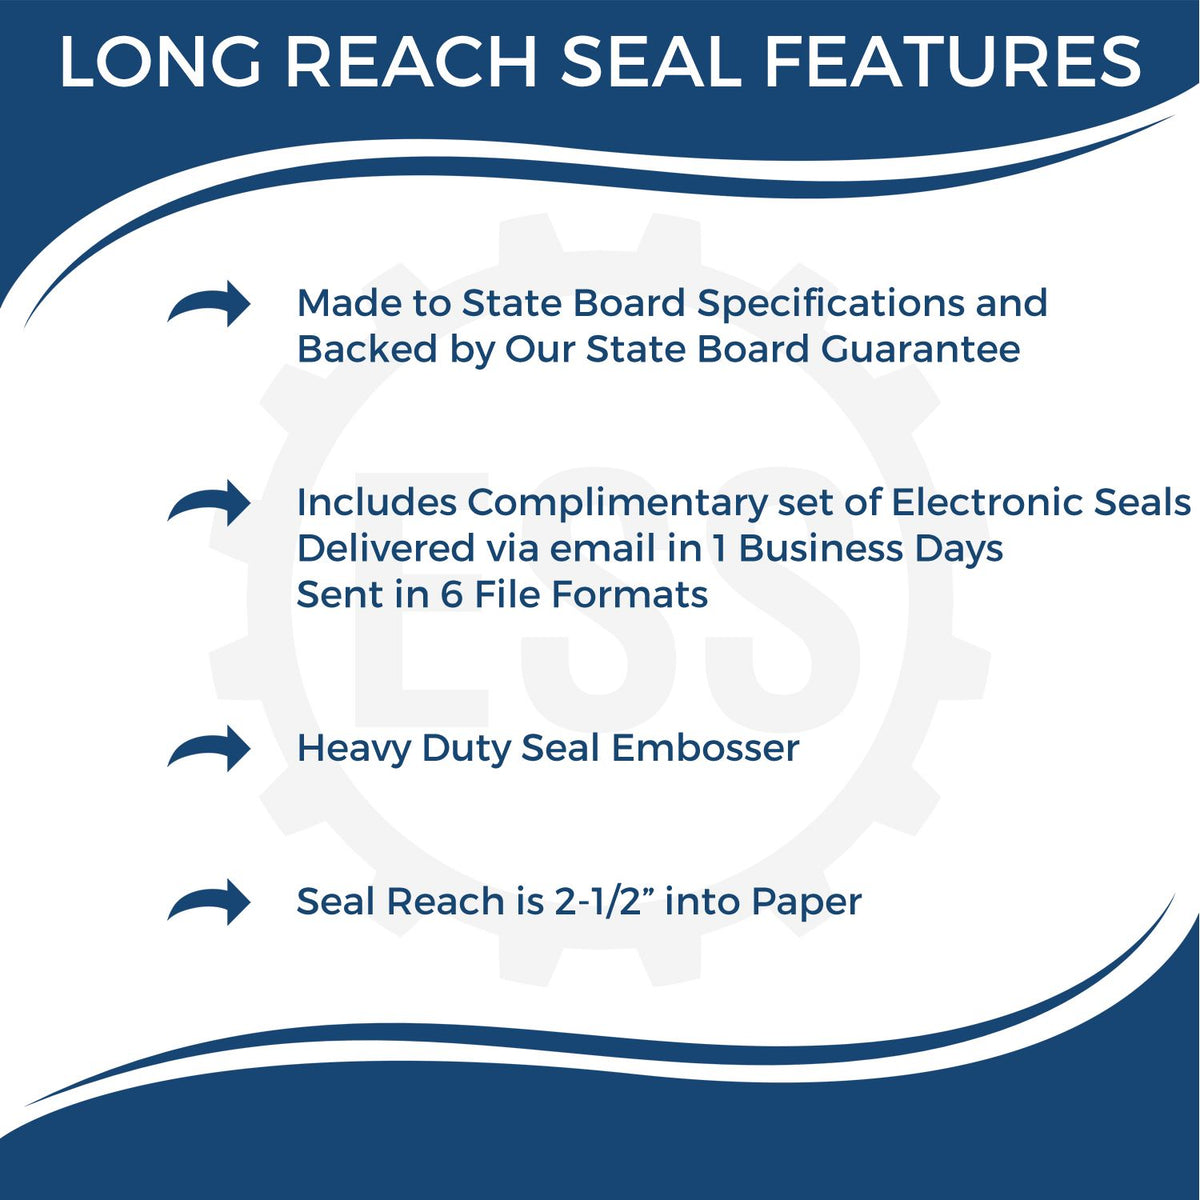 A picture of an infographic highlighting the selling points for the Long Reach Kentucky Geology Seal